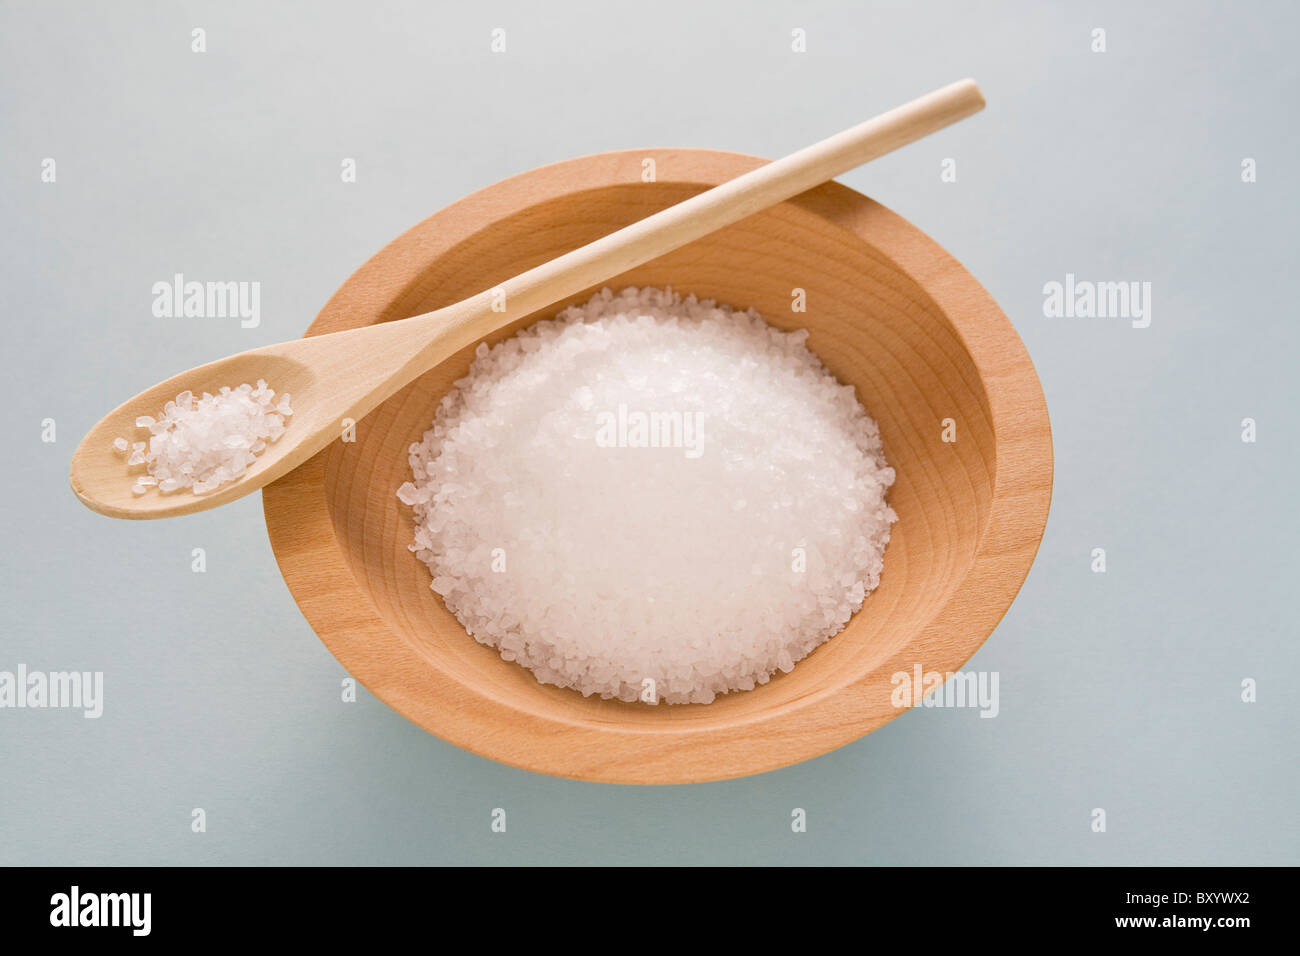 Salt in wooden bowl with spoon Stock Photo